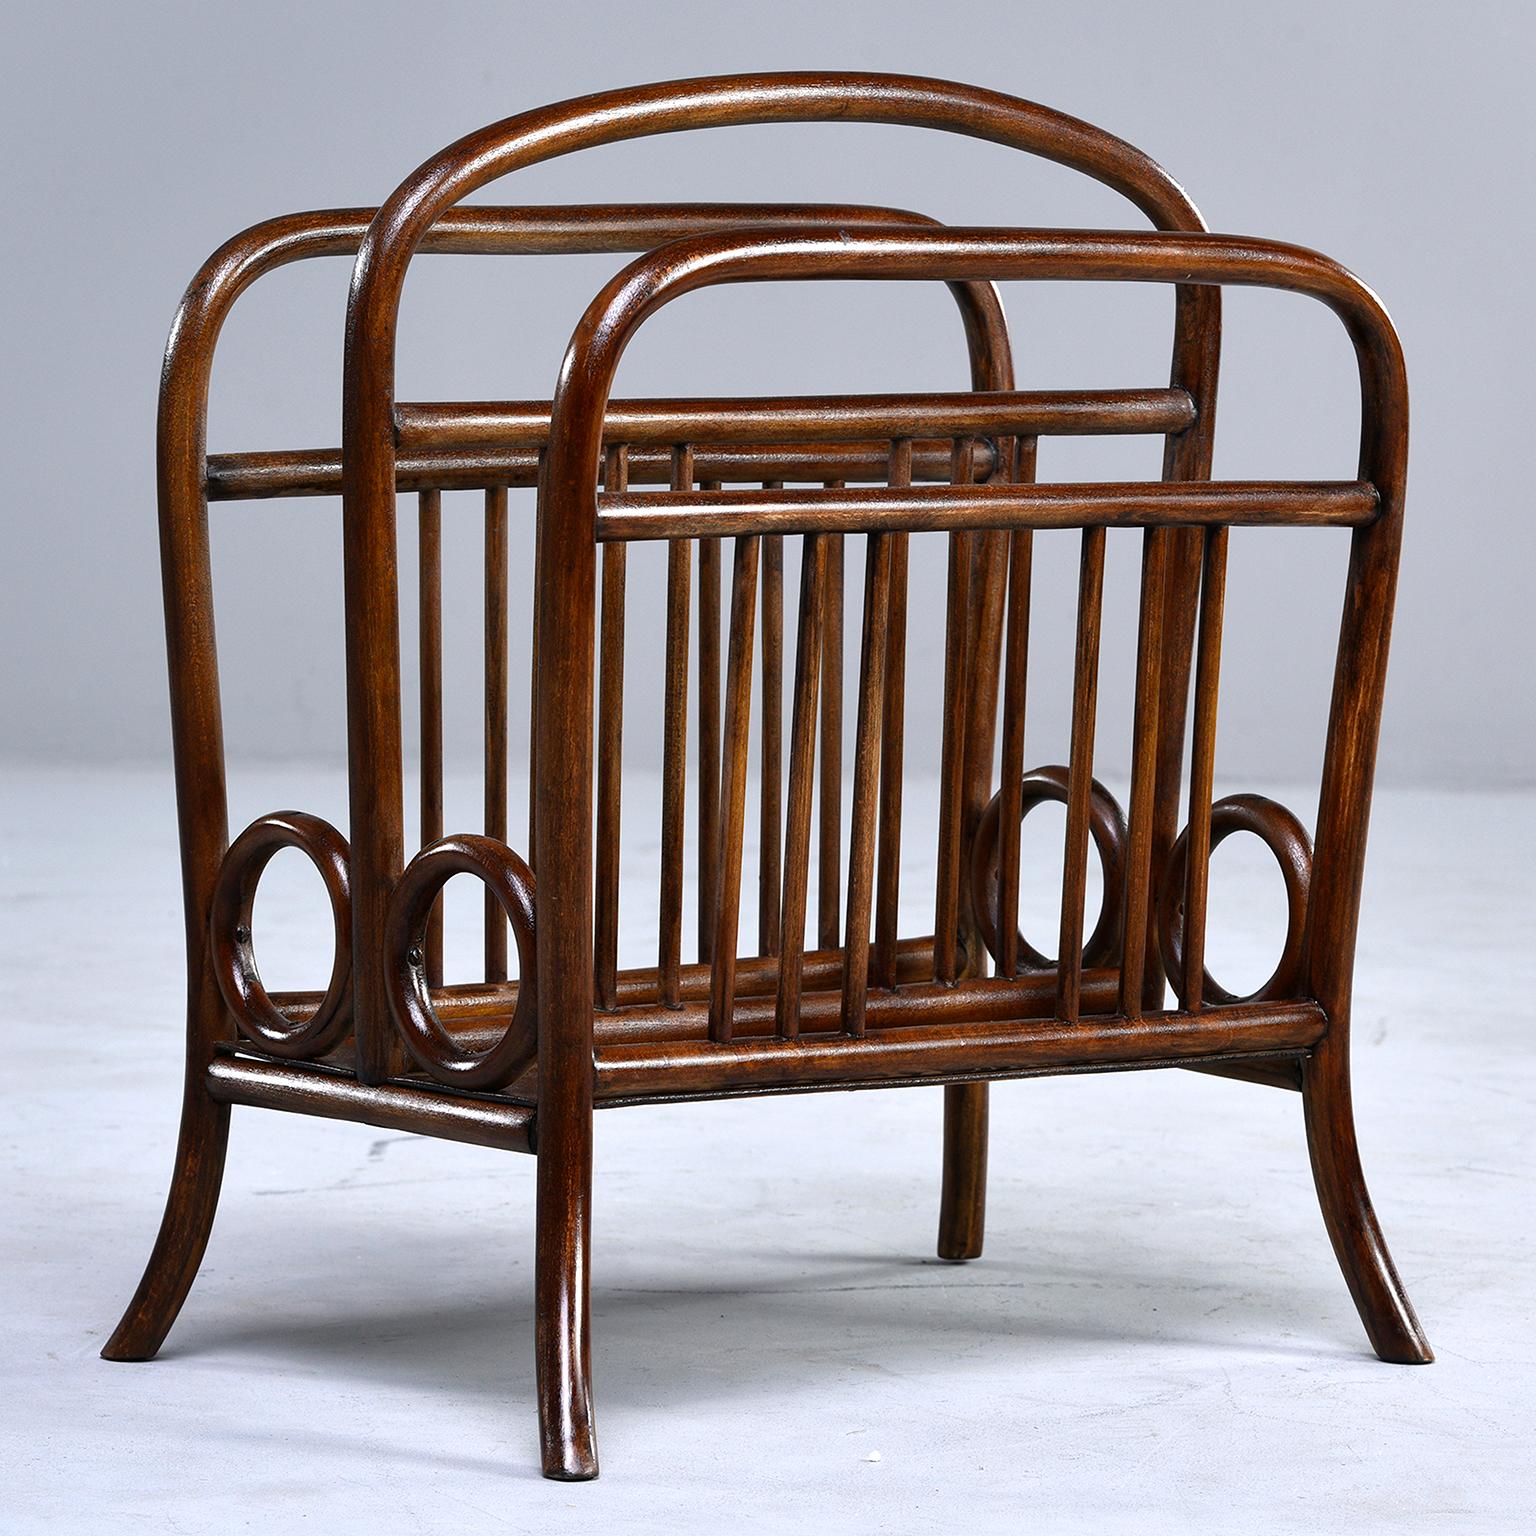 Thonet circa 1920 bentwood magazine rack features its original dark stained bent beechwood in a Classic design with partial original Thonet paper label affixed.
  